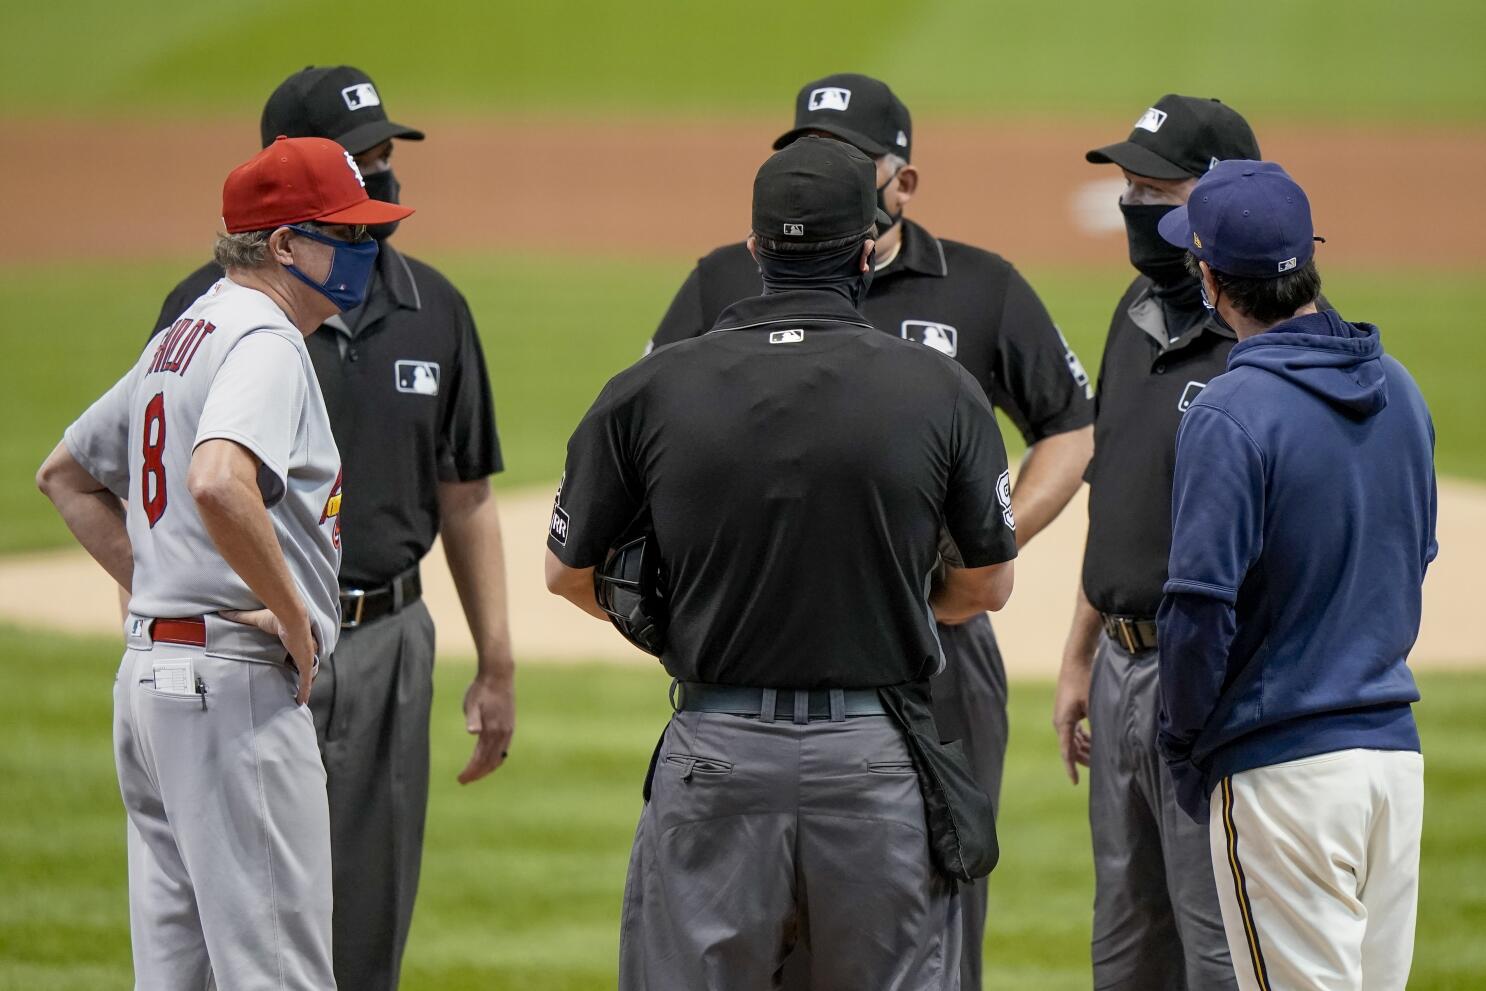 AP sources: MLB umpire tests positive for virus, crews shift - The